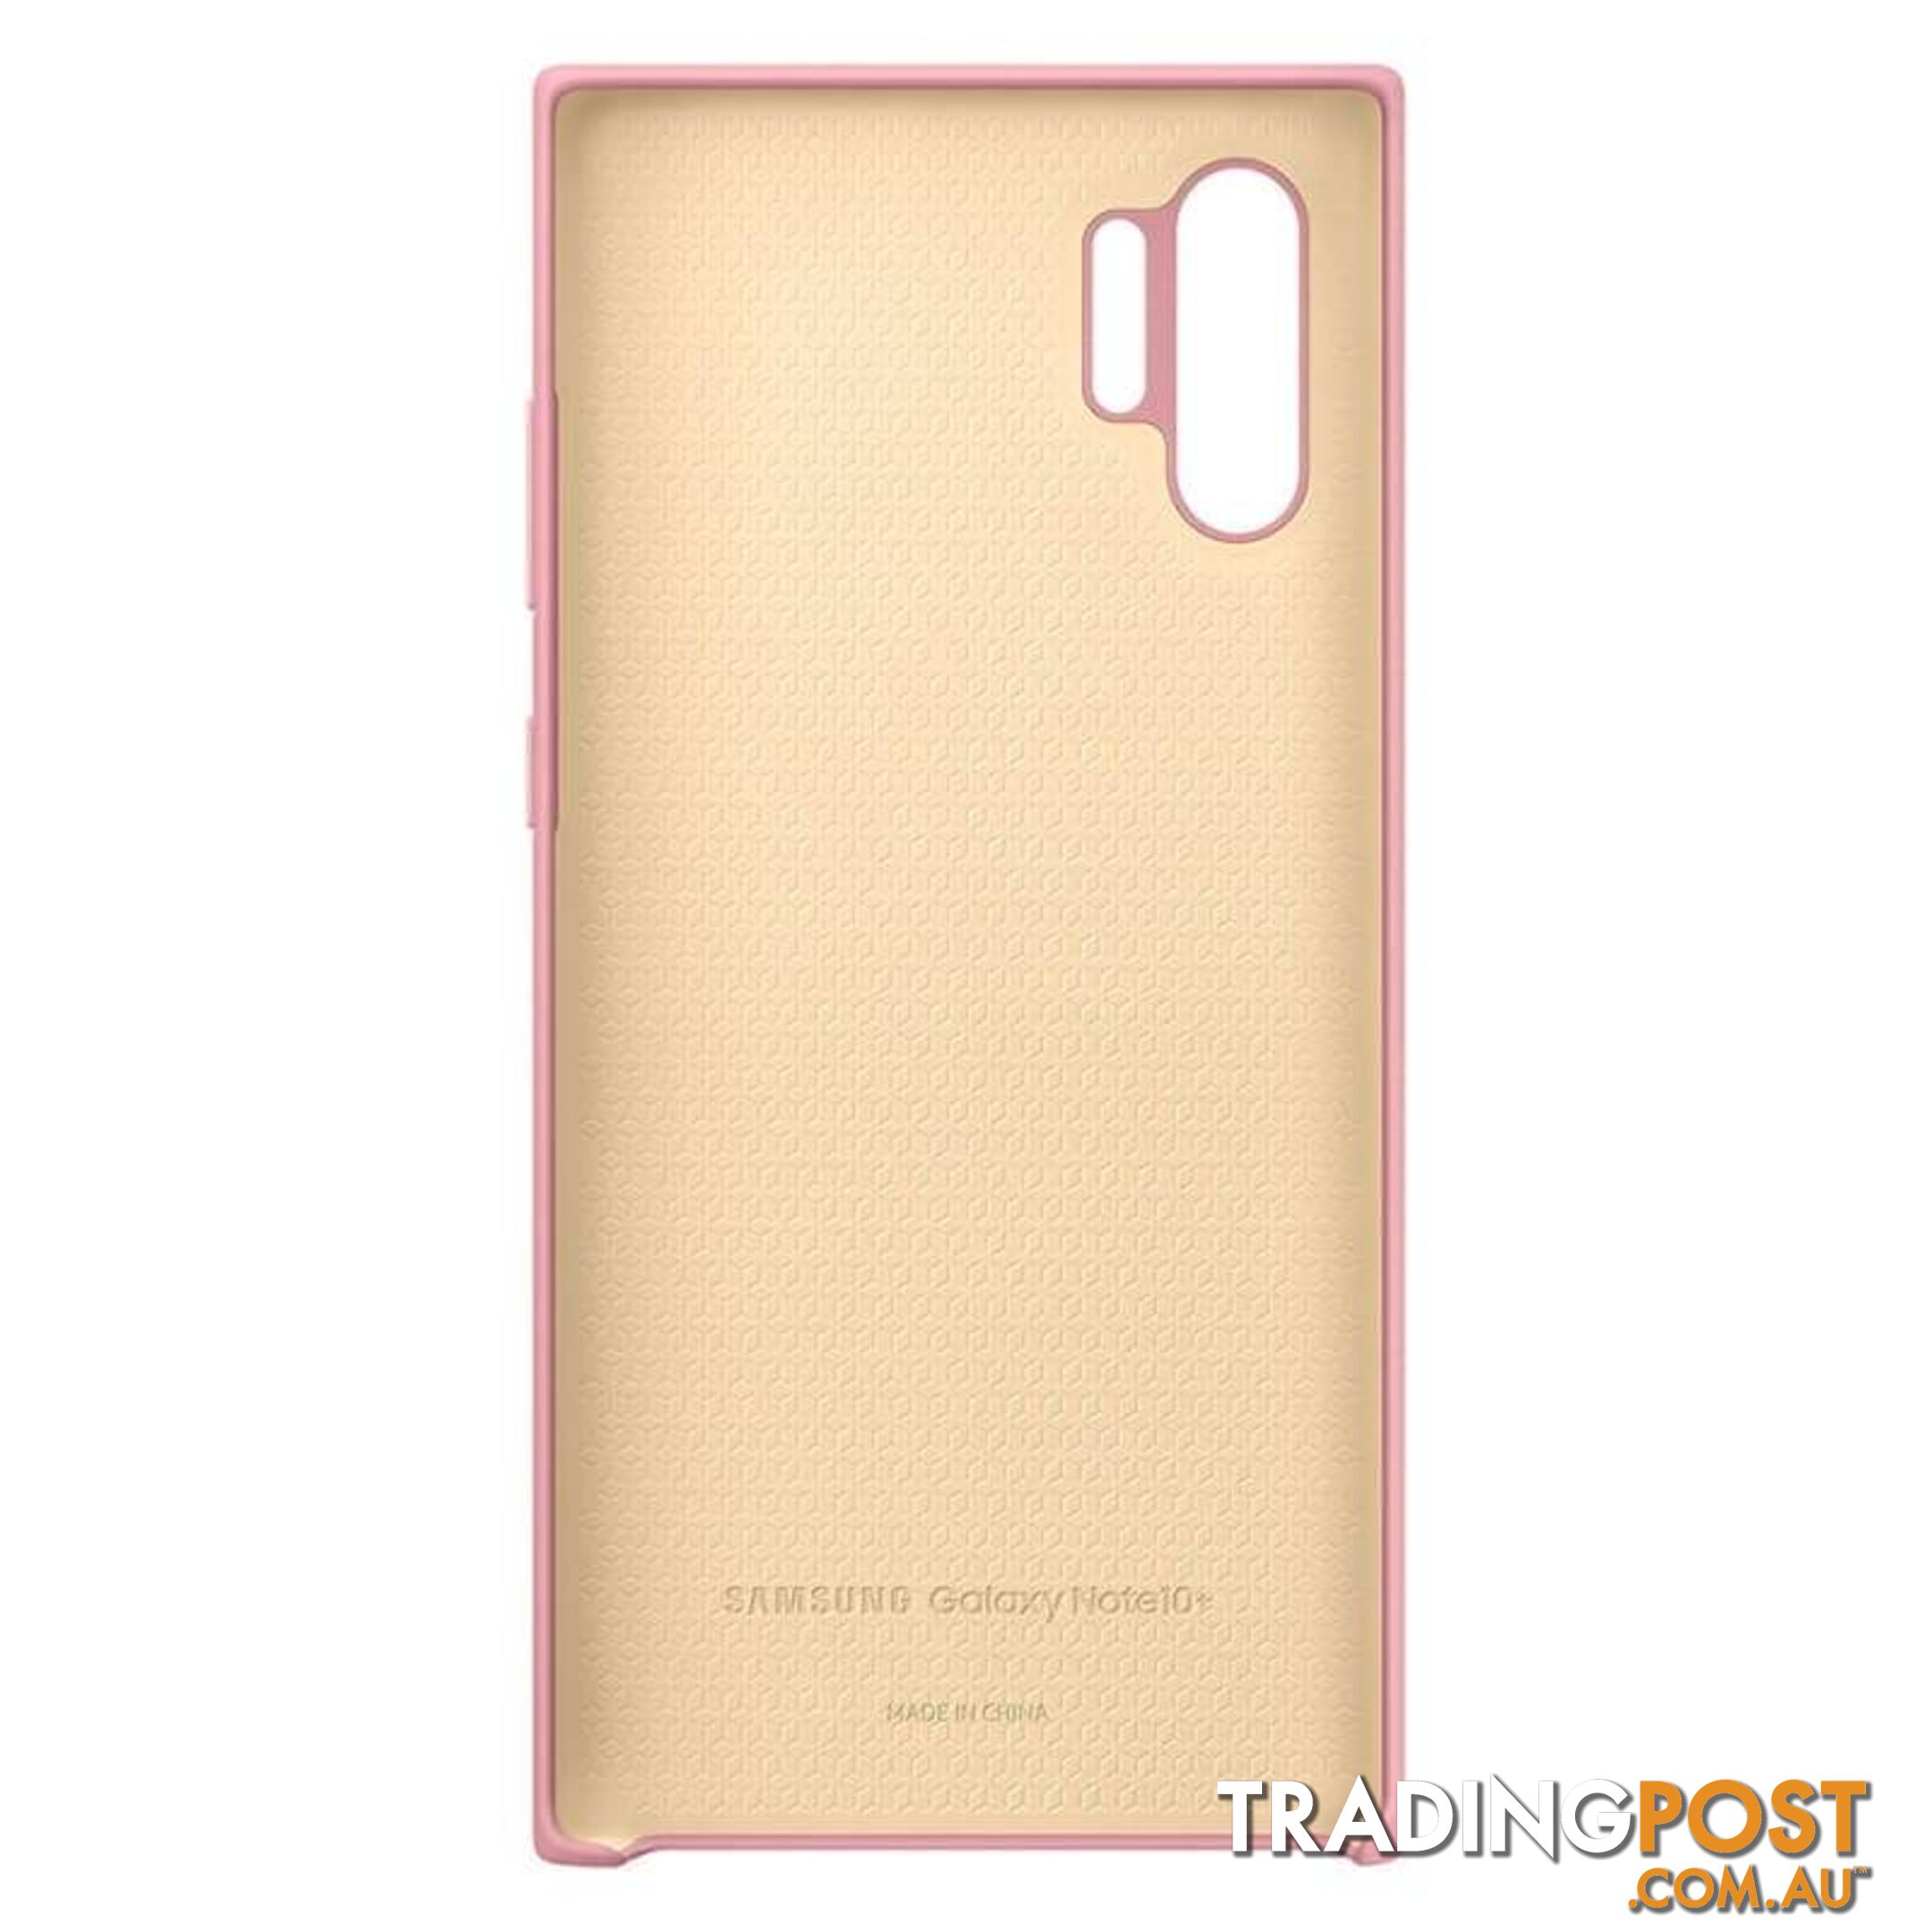 Samsung Silicone Cover For Samsung Galaxy Note 10+ - Samsung - Pink - 8806090043468